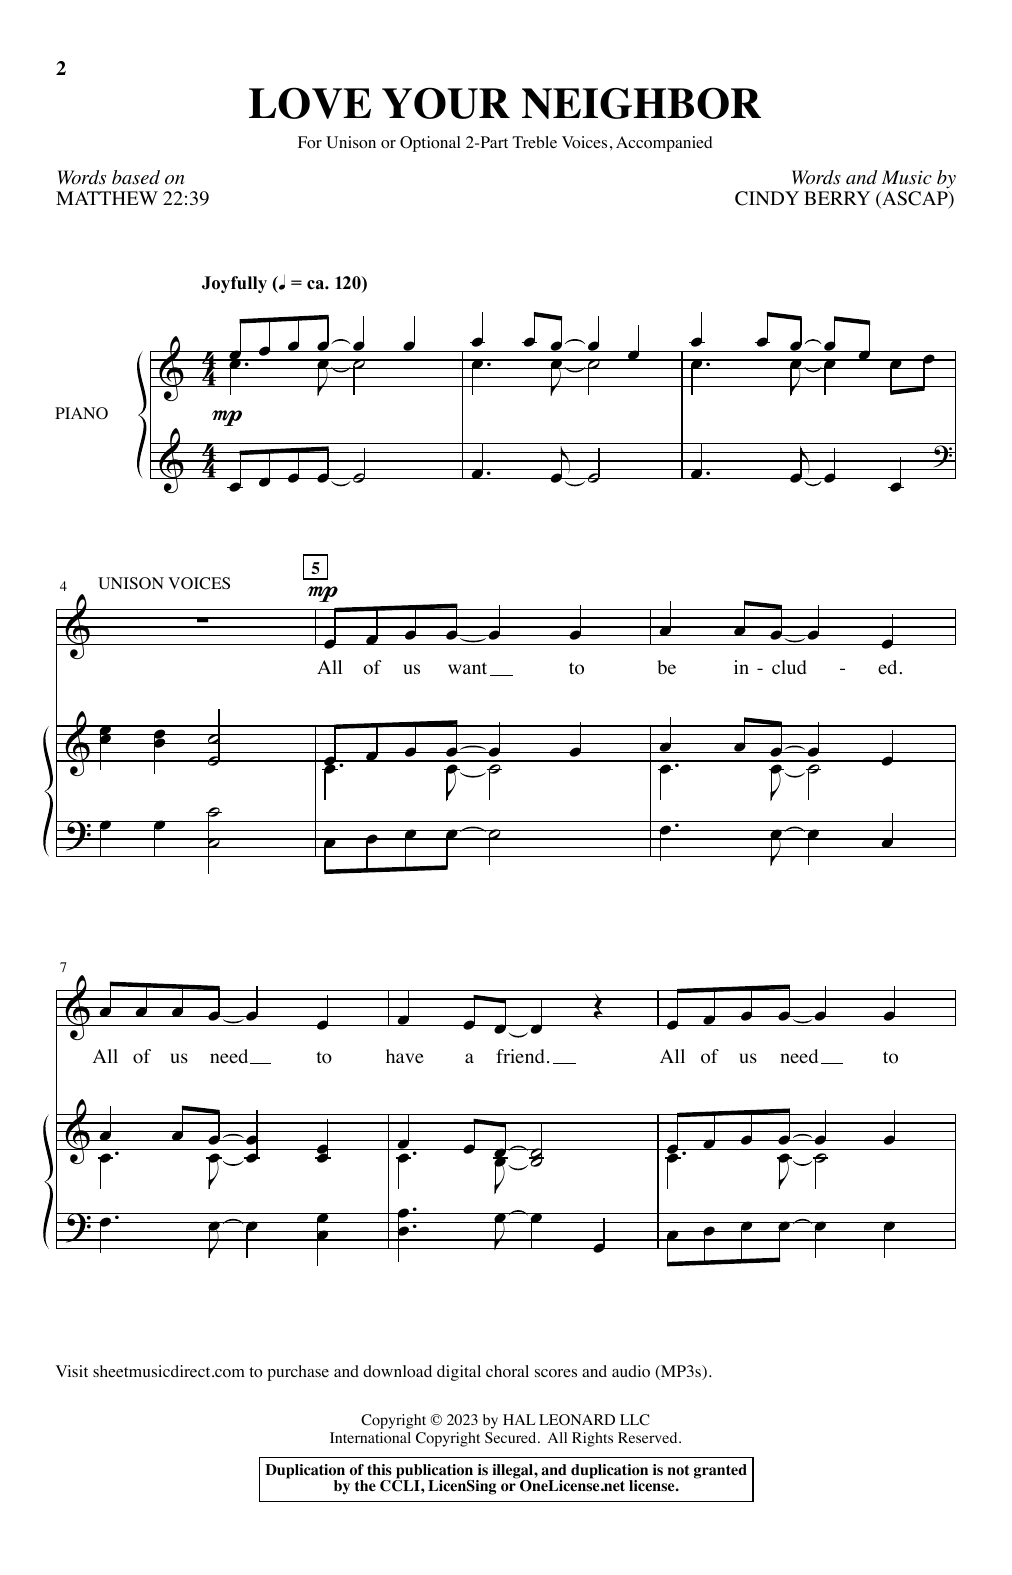 Download Cindy Berry Love Your Neighbor Sheet Music